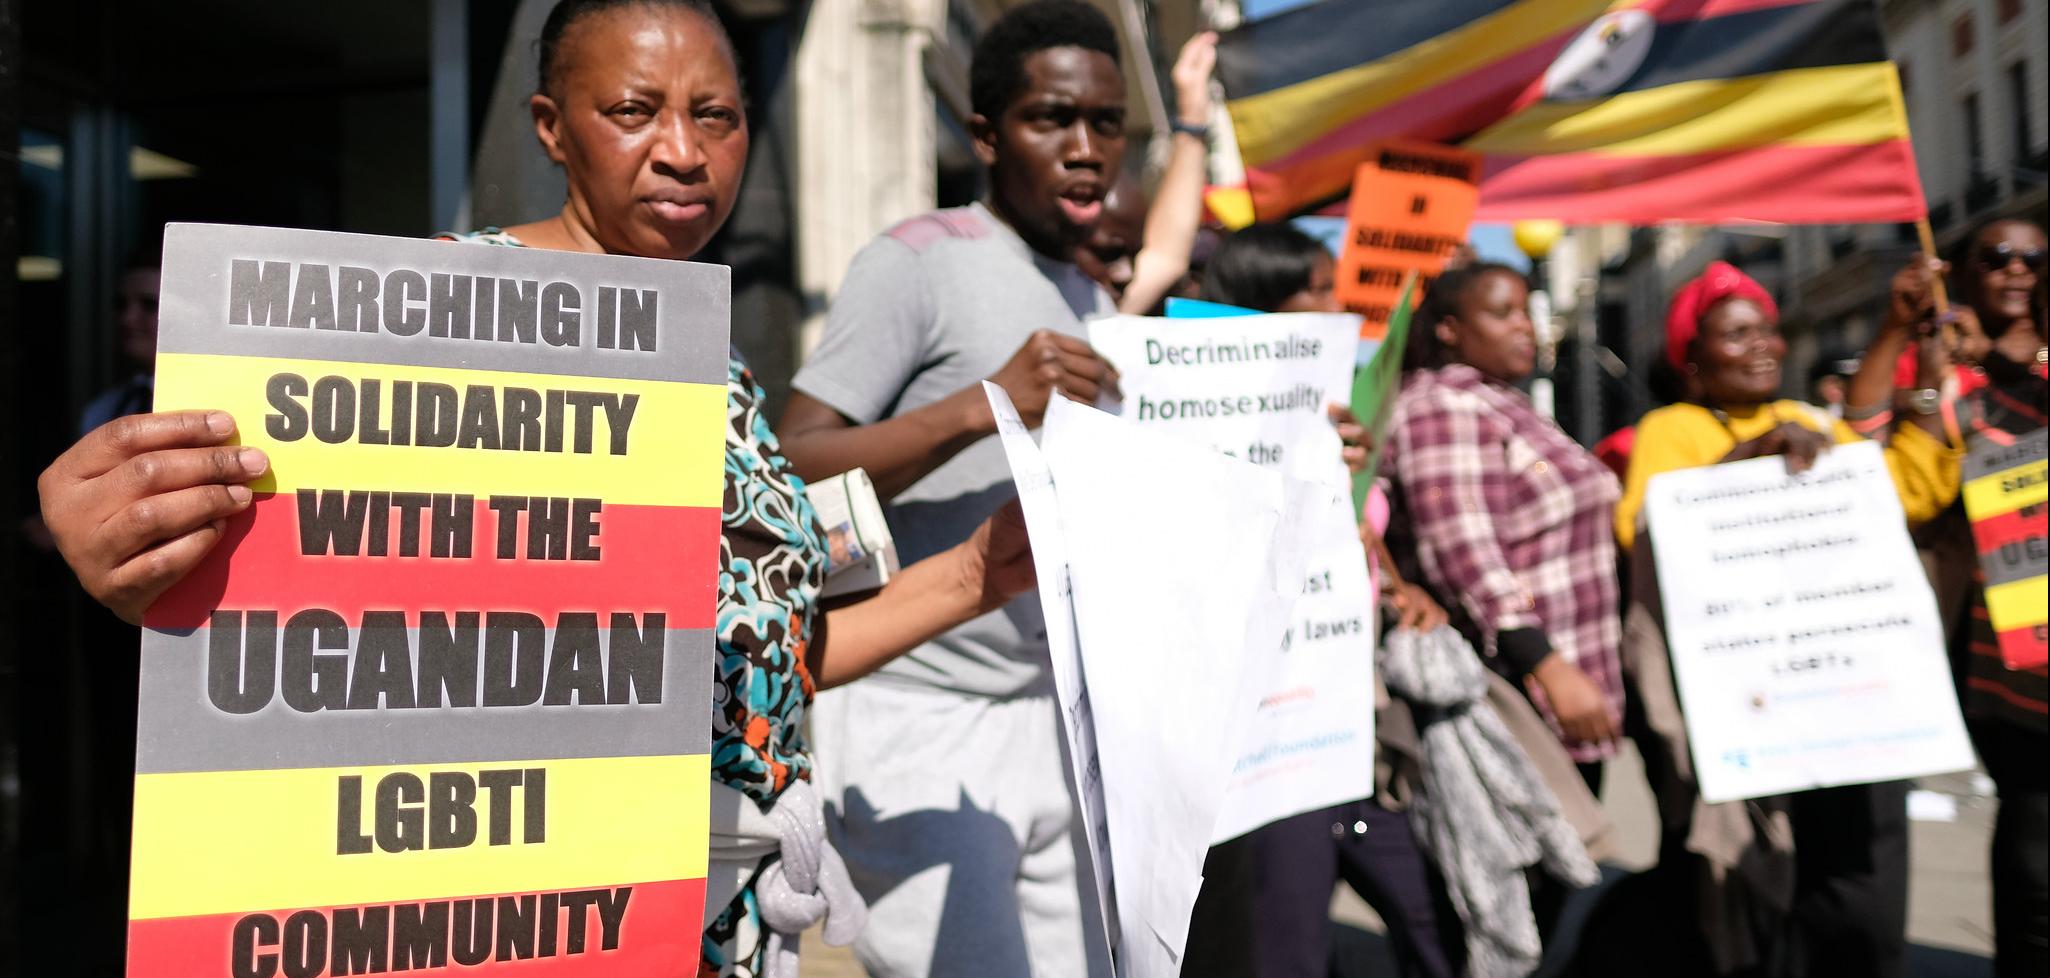 A woman in the front of the frame holding a sign that reads "marching in solidarity with the Ugandan LGBTI Community"